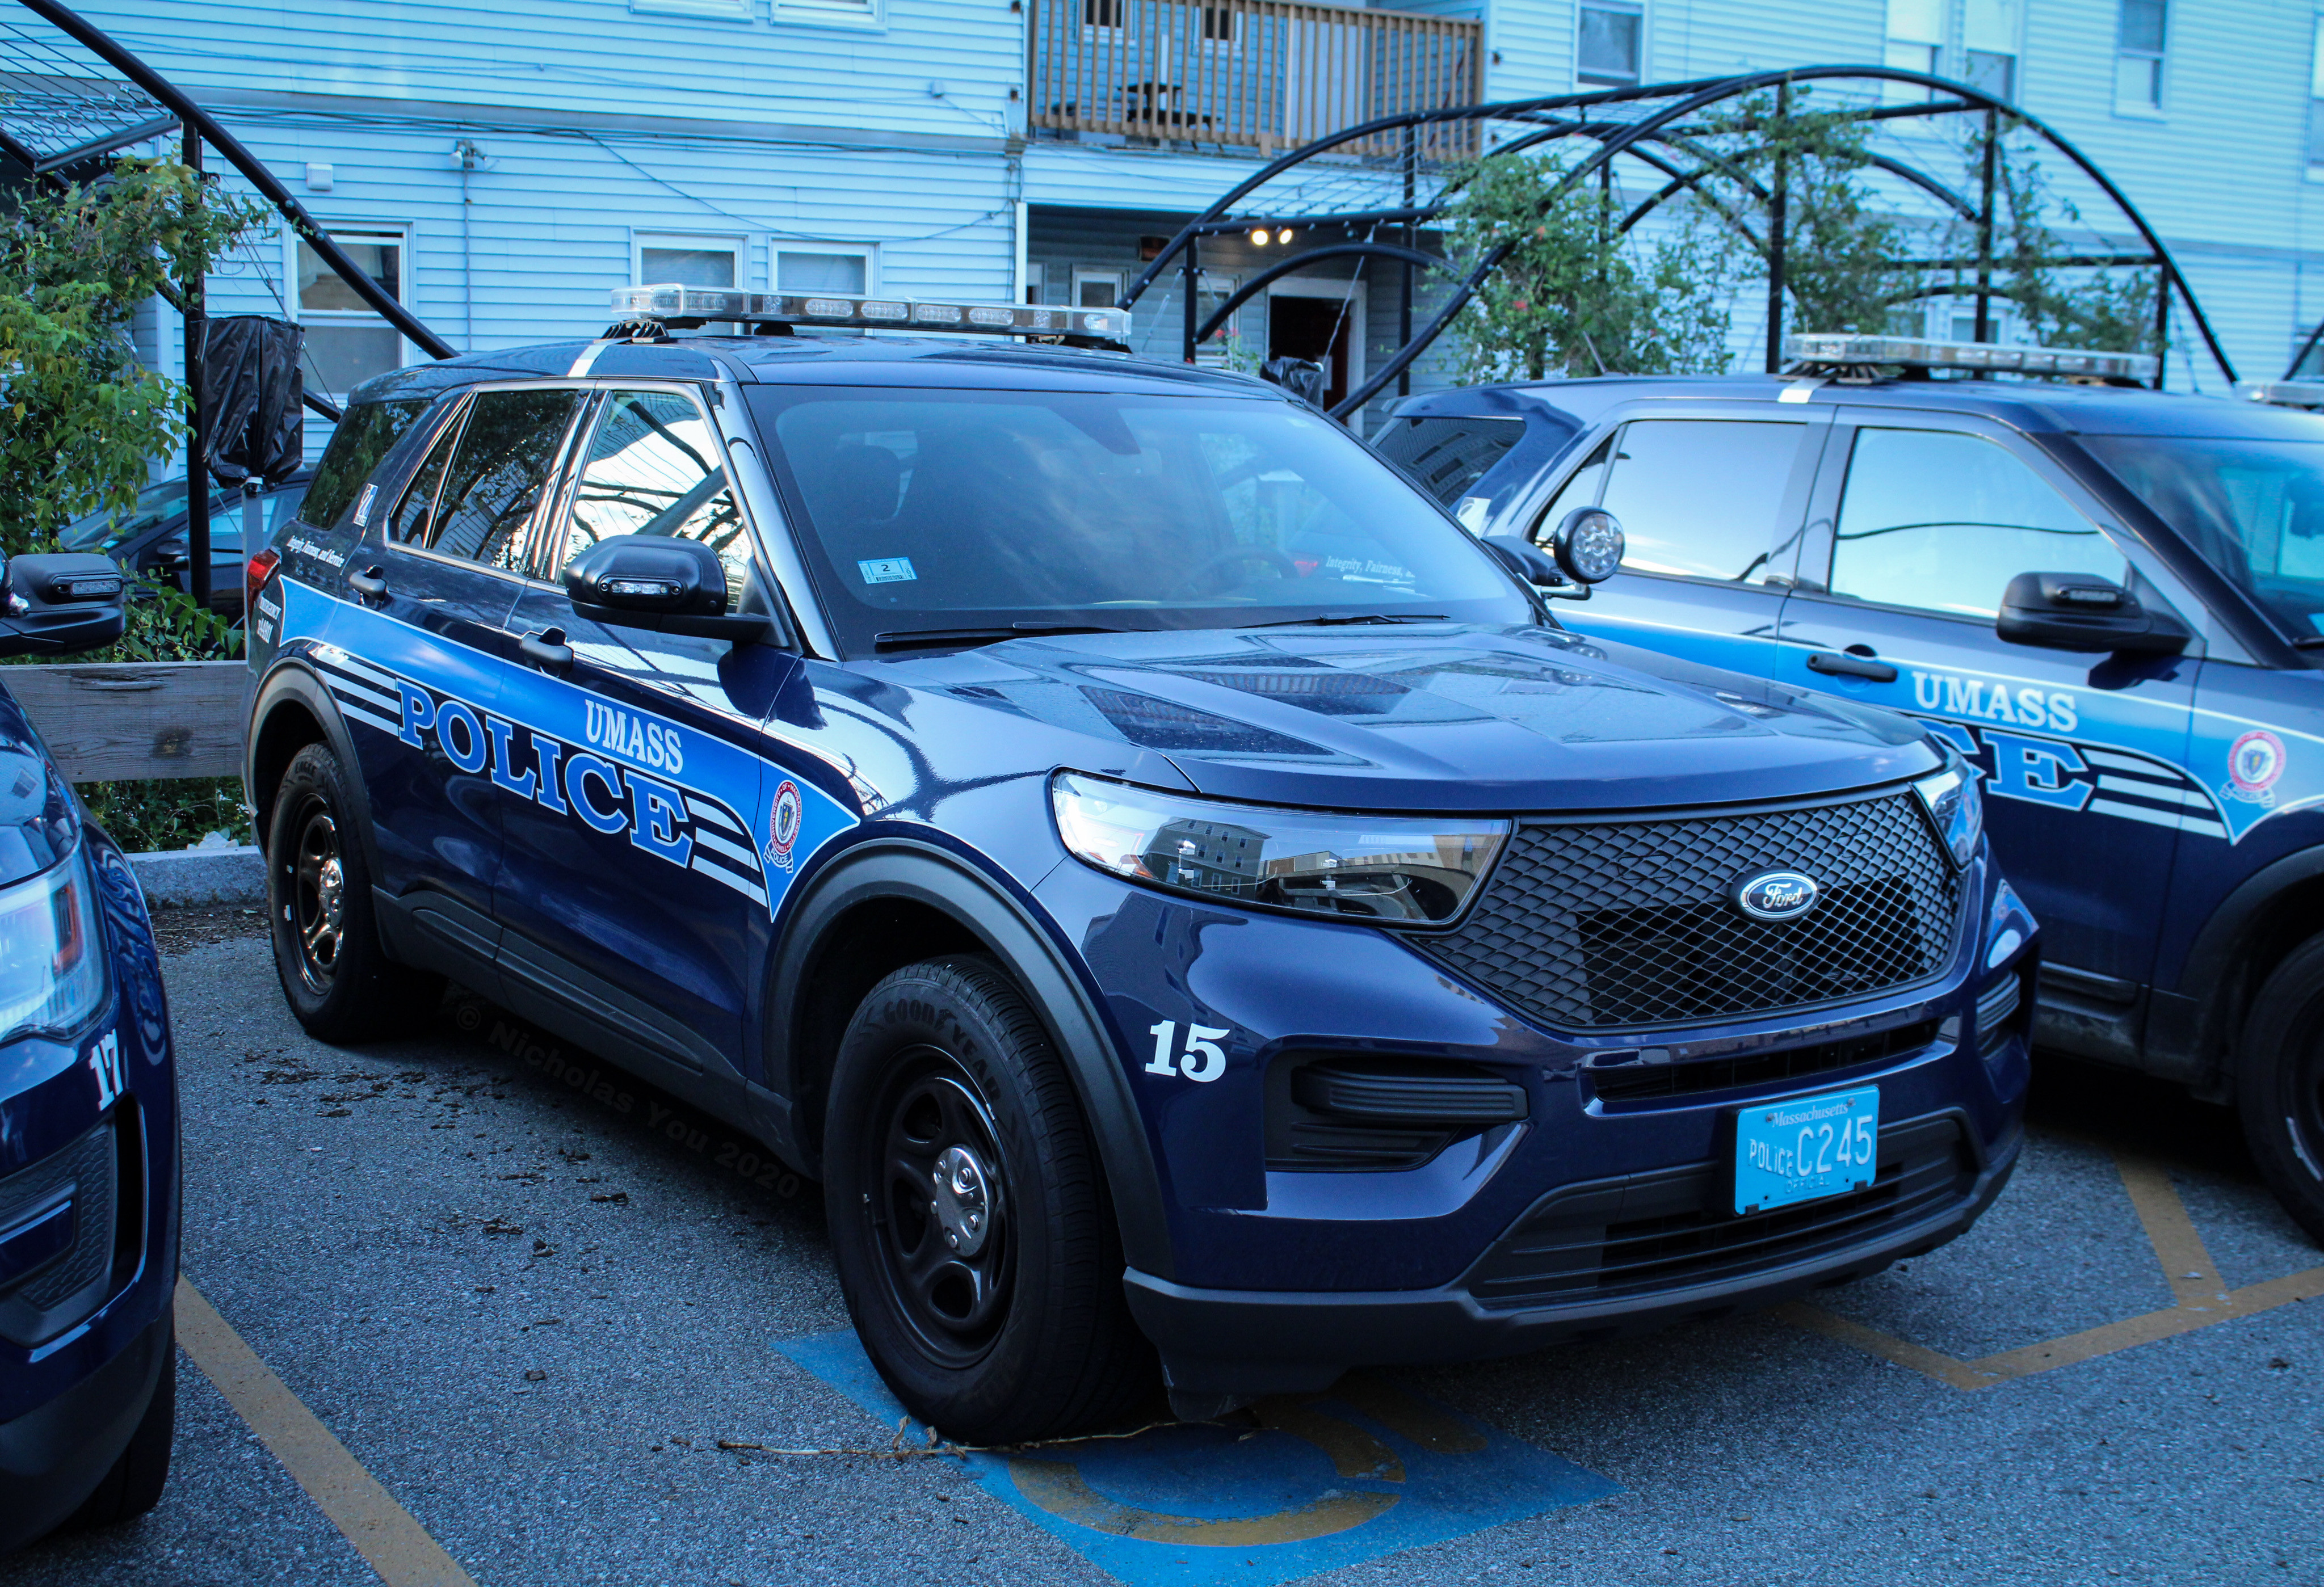 A photo  of University of Massachusetts Lowell Police
            Cruiser 15, a 2020 Ford Police Interceptor Utility             taken by Nicholas You